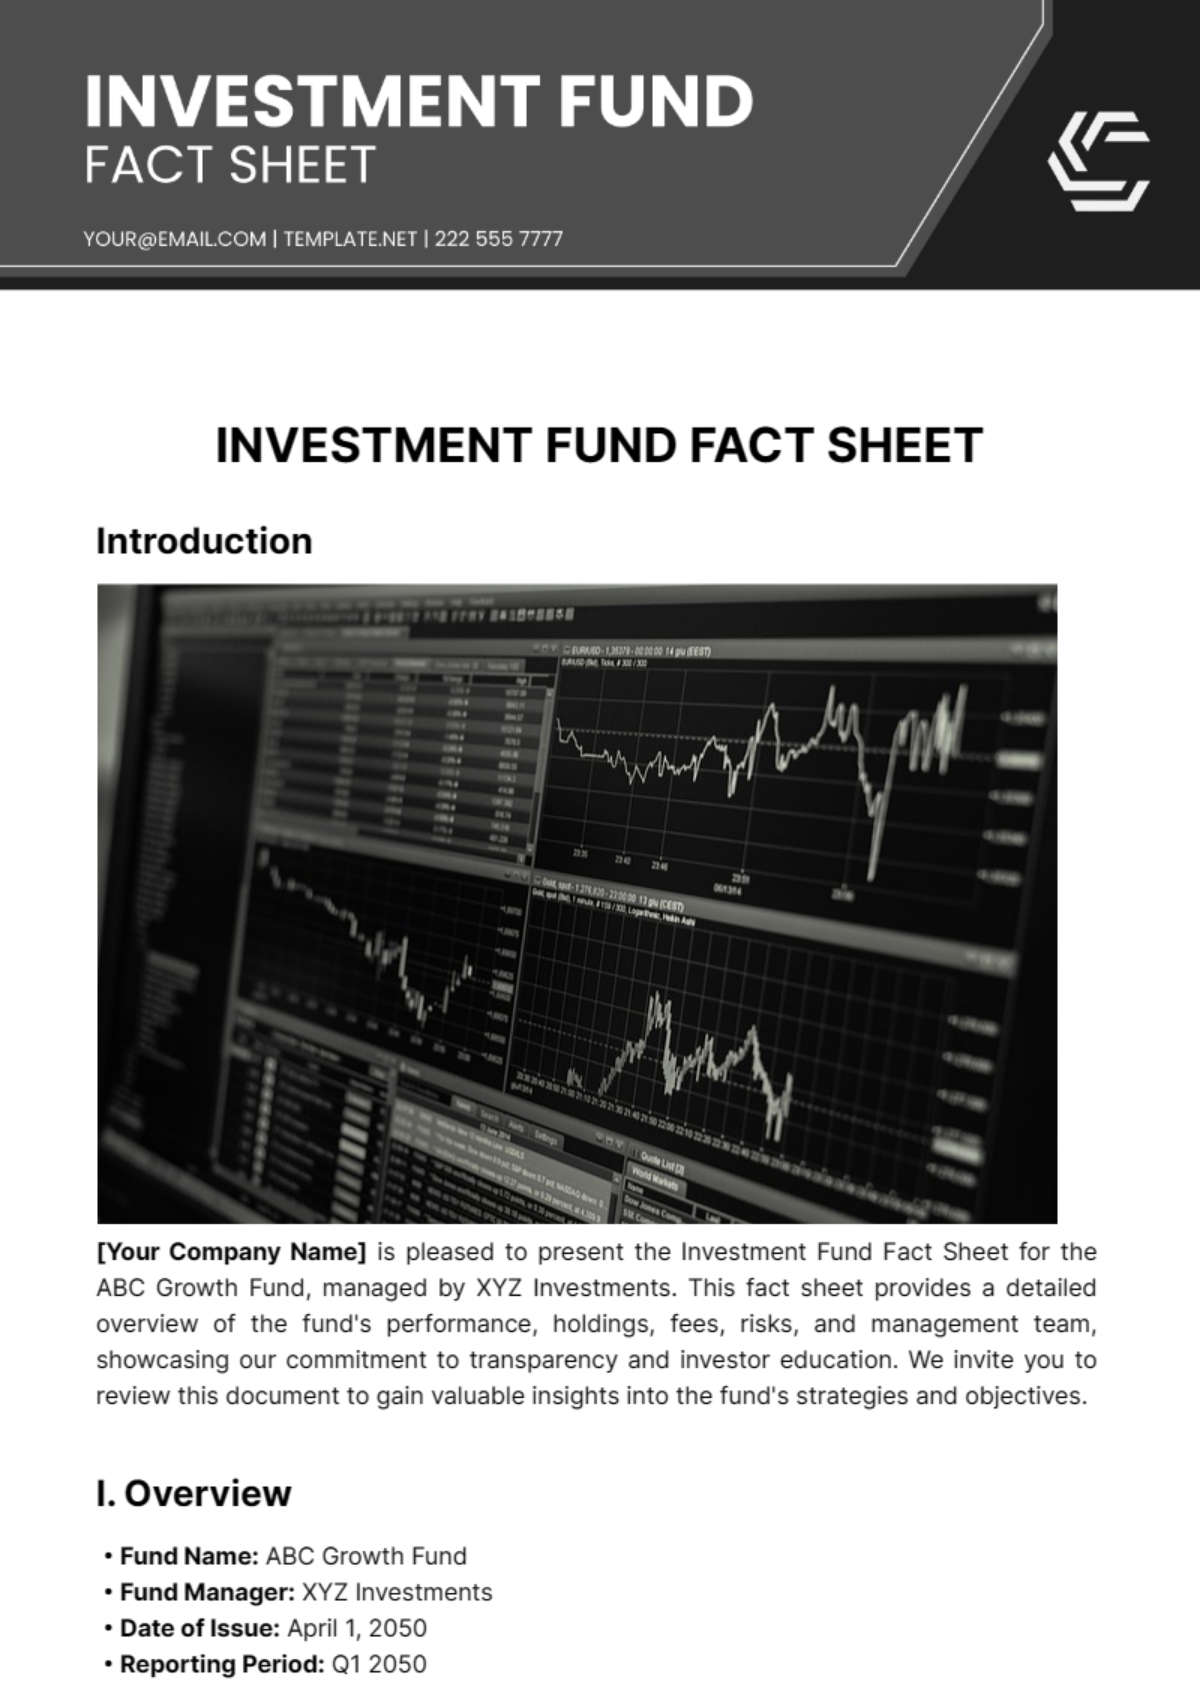 Investment Fund Fact Sheet Template